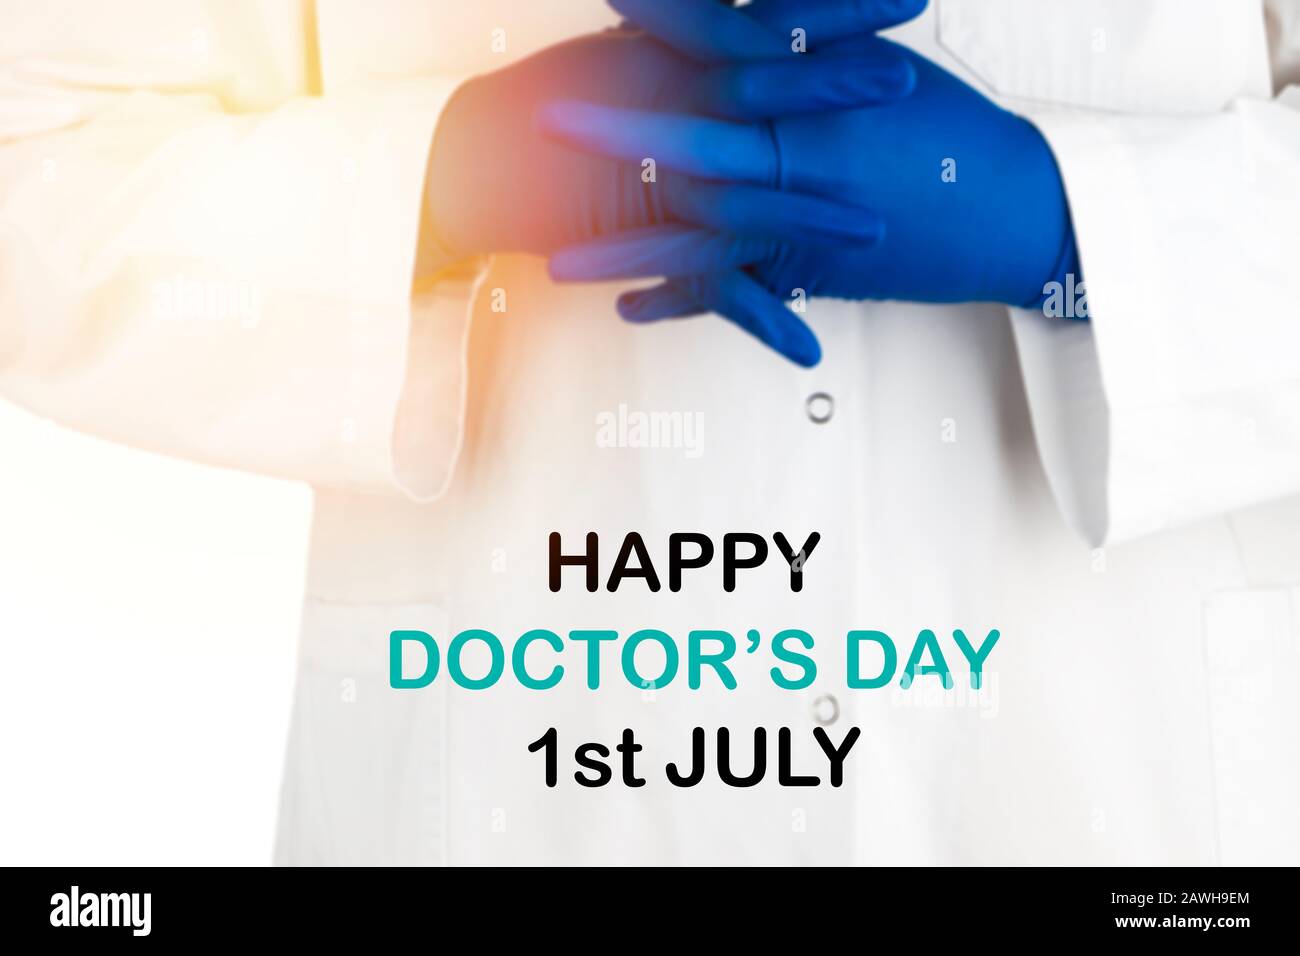 Blurry Image Of Doctor Hands With Text Happy Doctor S Day 1st July On White Background Selective Focus And Crop Fragment Stock Photo Alamy